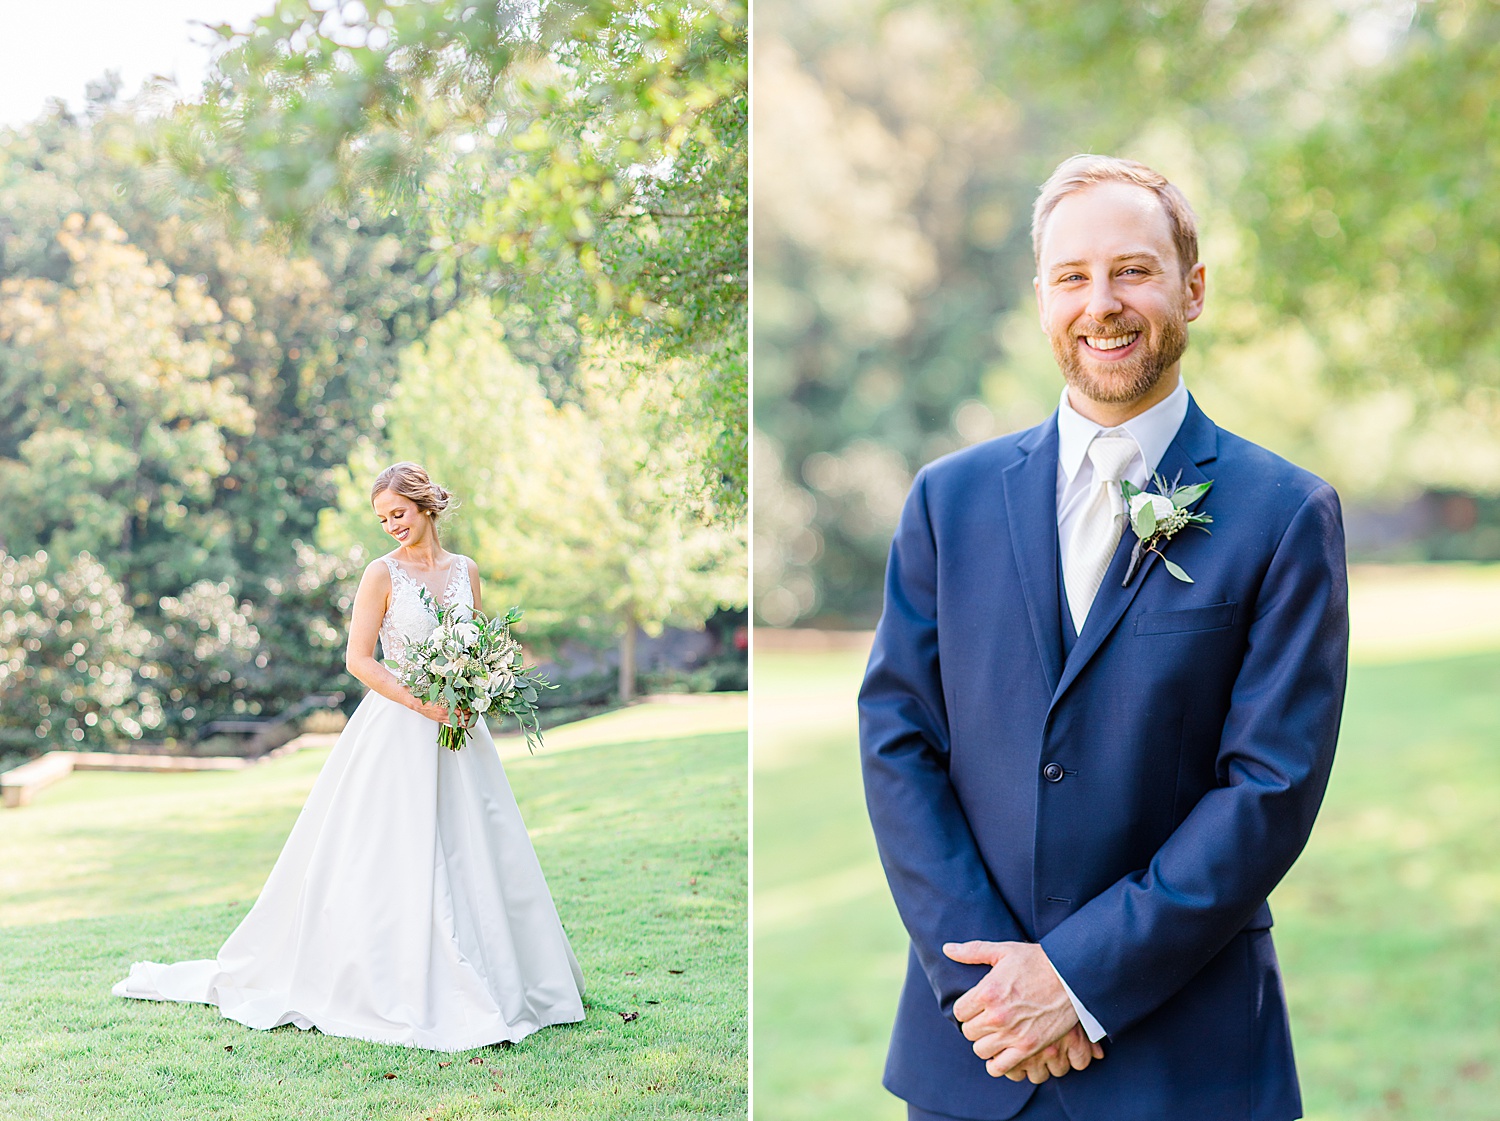 portraits of bride and groom before their wedding ceremony